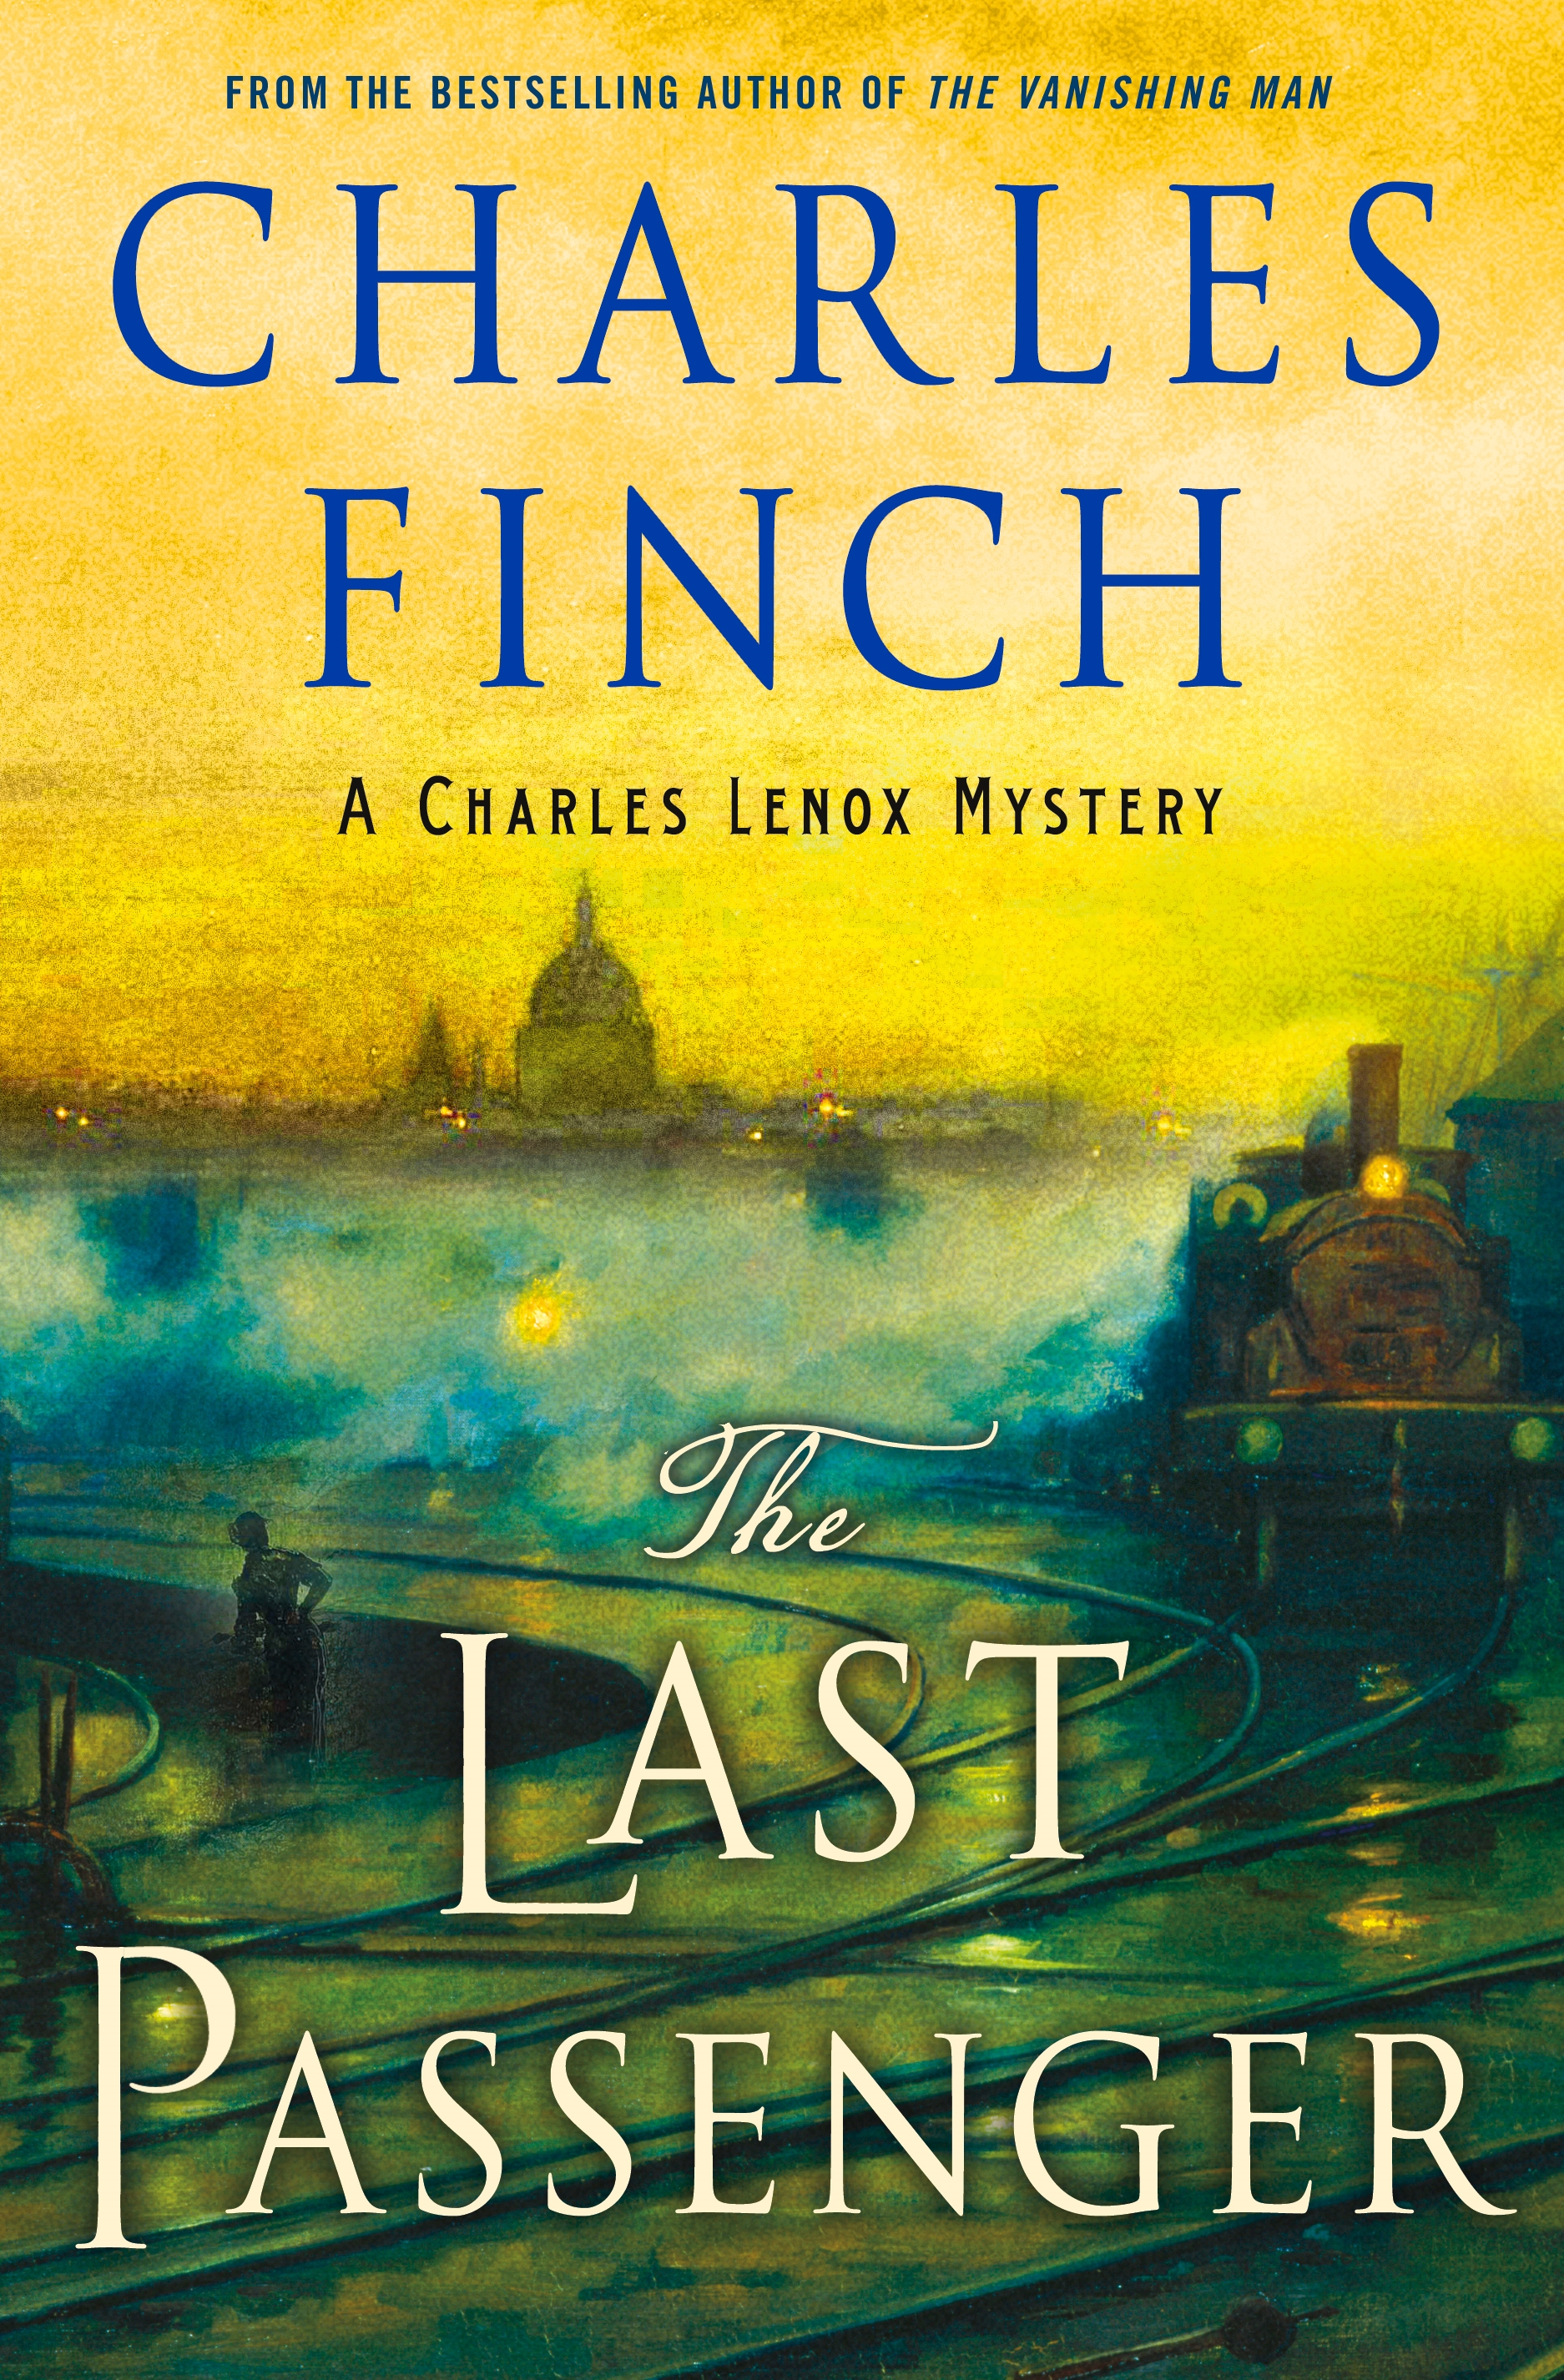 Book “The Last Passenger” by Charles Finch